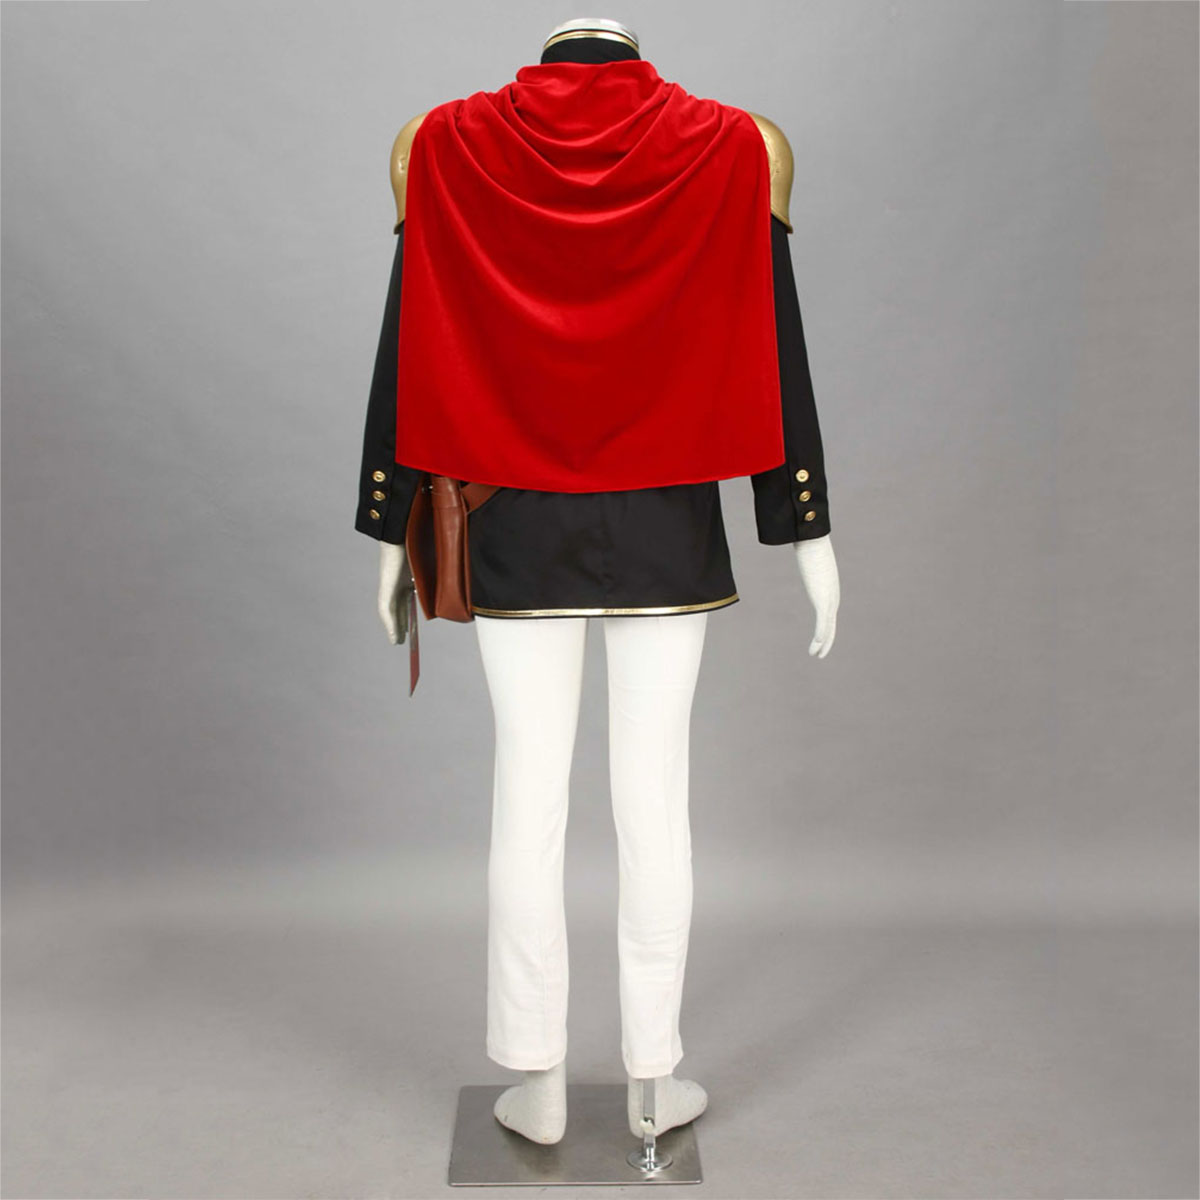 Final Fantasy Type-0 Ace 1 Cosplay Costumes AU